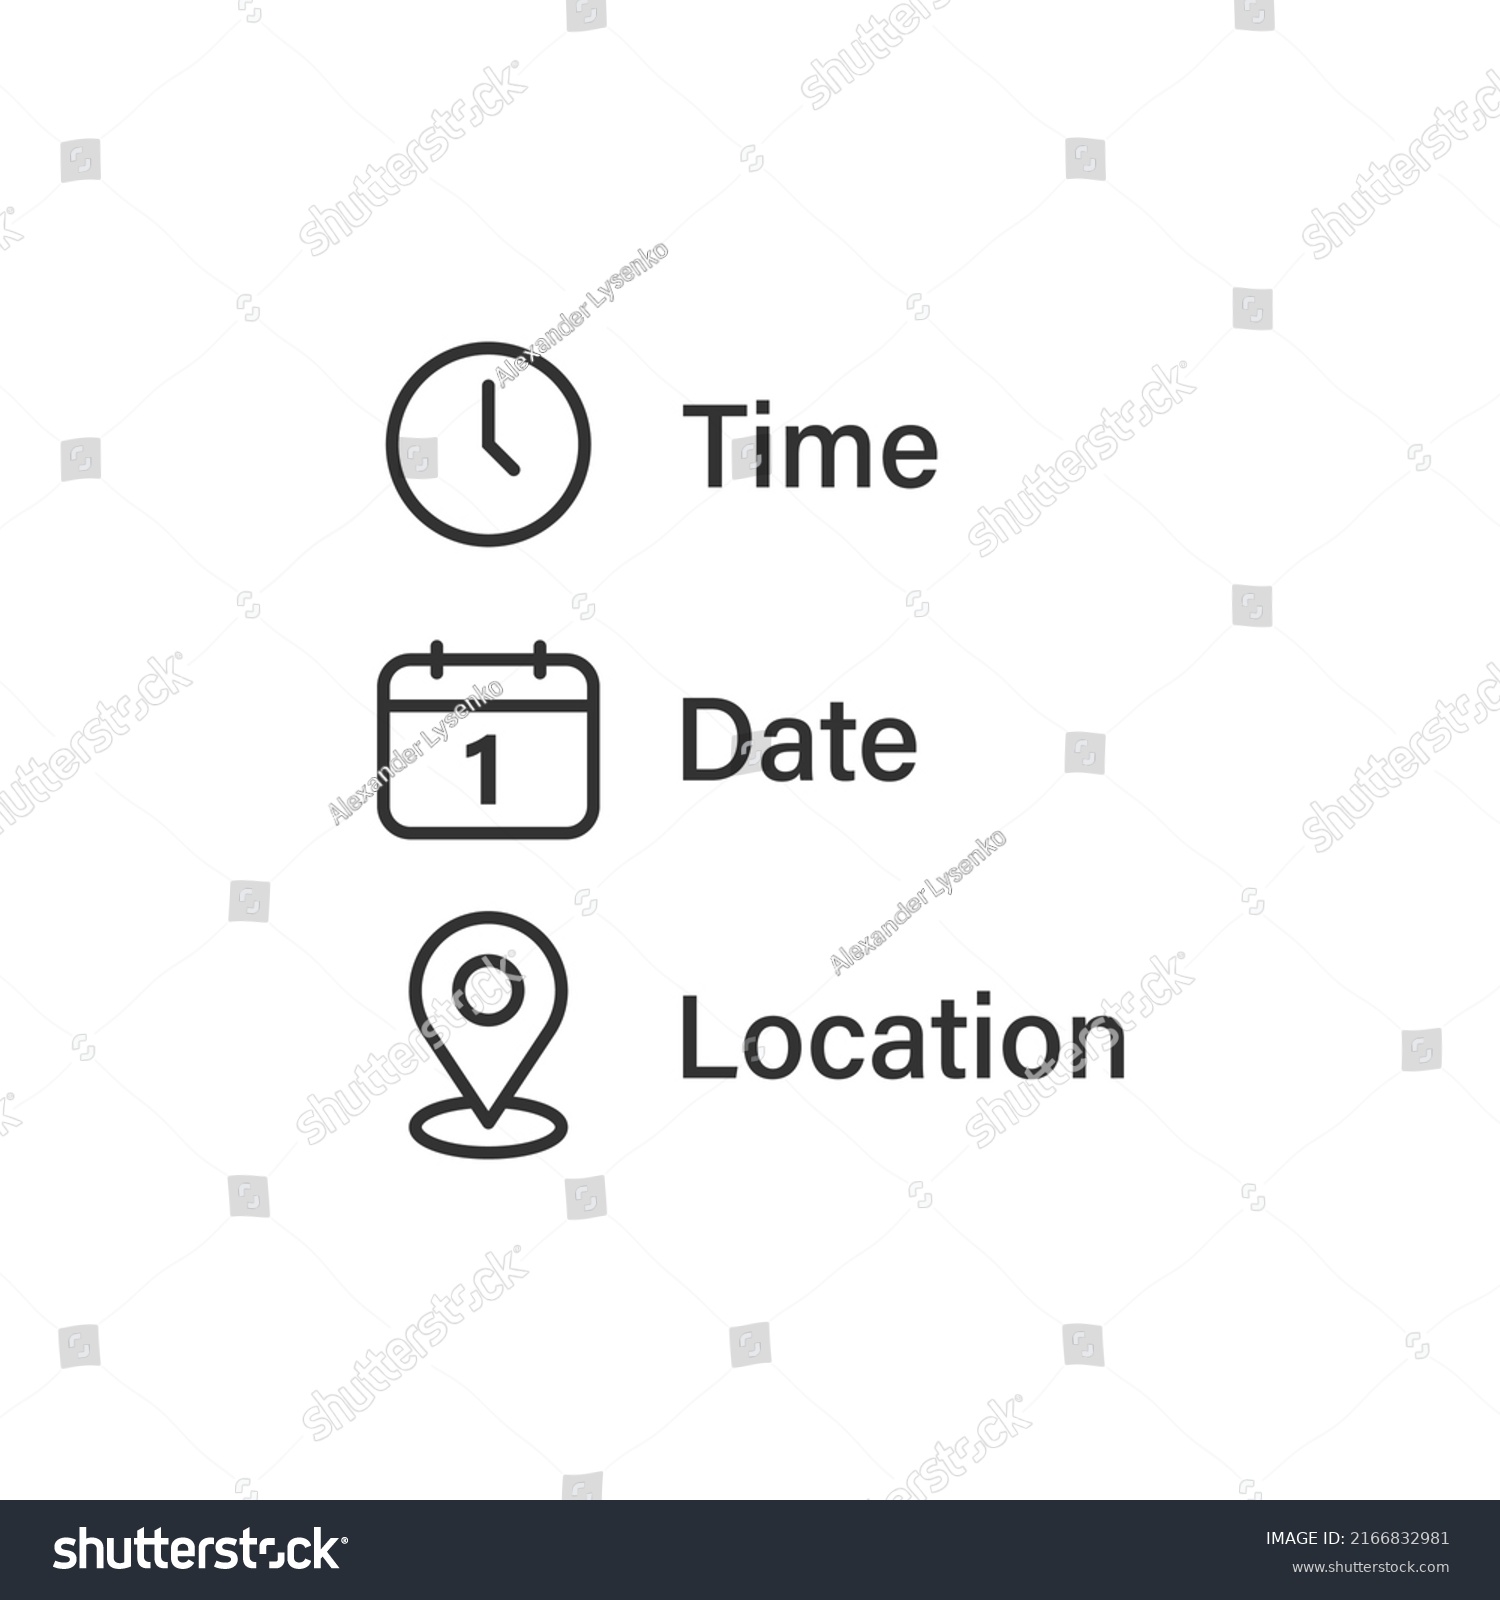 Date, time, location icon in flat style. Event message vector illustration on isolated background. Information sign business concept. #2166832981